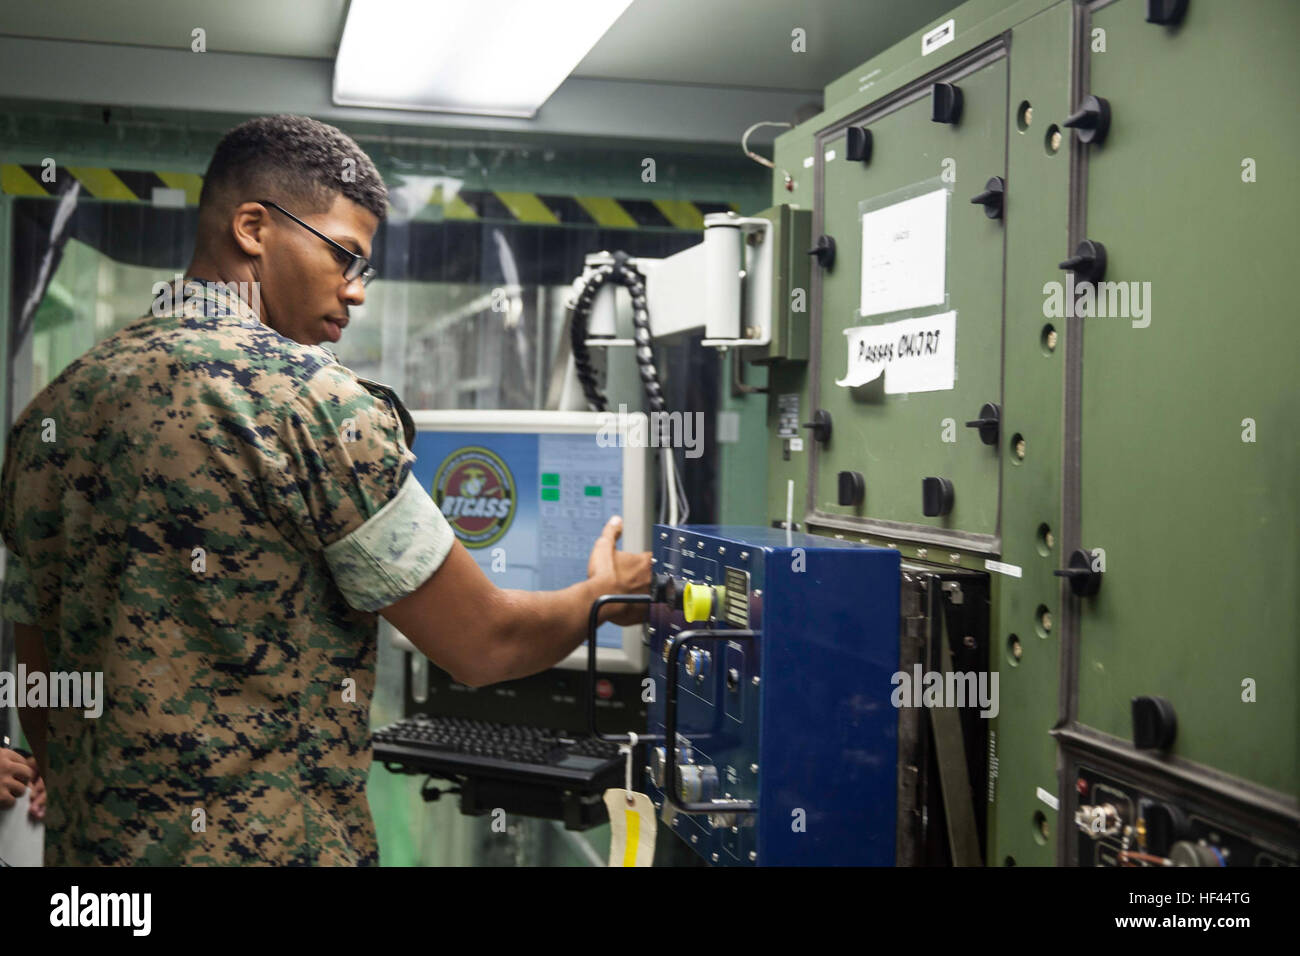 U.S. Marine Corps Lance Cpl. Emmanuel I. Fitzgerald, an aviation electrician assigned to Marine Aviation Logistics Squadron (MALS) 29, operates the Reconfigurable Transportable Consolidated Automated Support System aboard Marine Corps Air Station New River, N.C., Oct 18, 2016. MALS-29’s mission is to provide aviation logistics support, guidance, planning, and direction to other squadrons within the Marine Aircraft Group, as well as logistics support for Navy funded equipment in the supporting Marine Wing Support Squadron, Marine Air Control Group, and Marine Aircraft Wing/Mobile Calibration Co Stock Photo